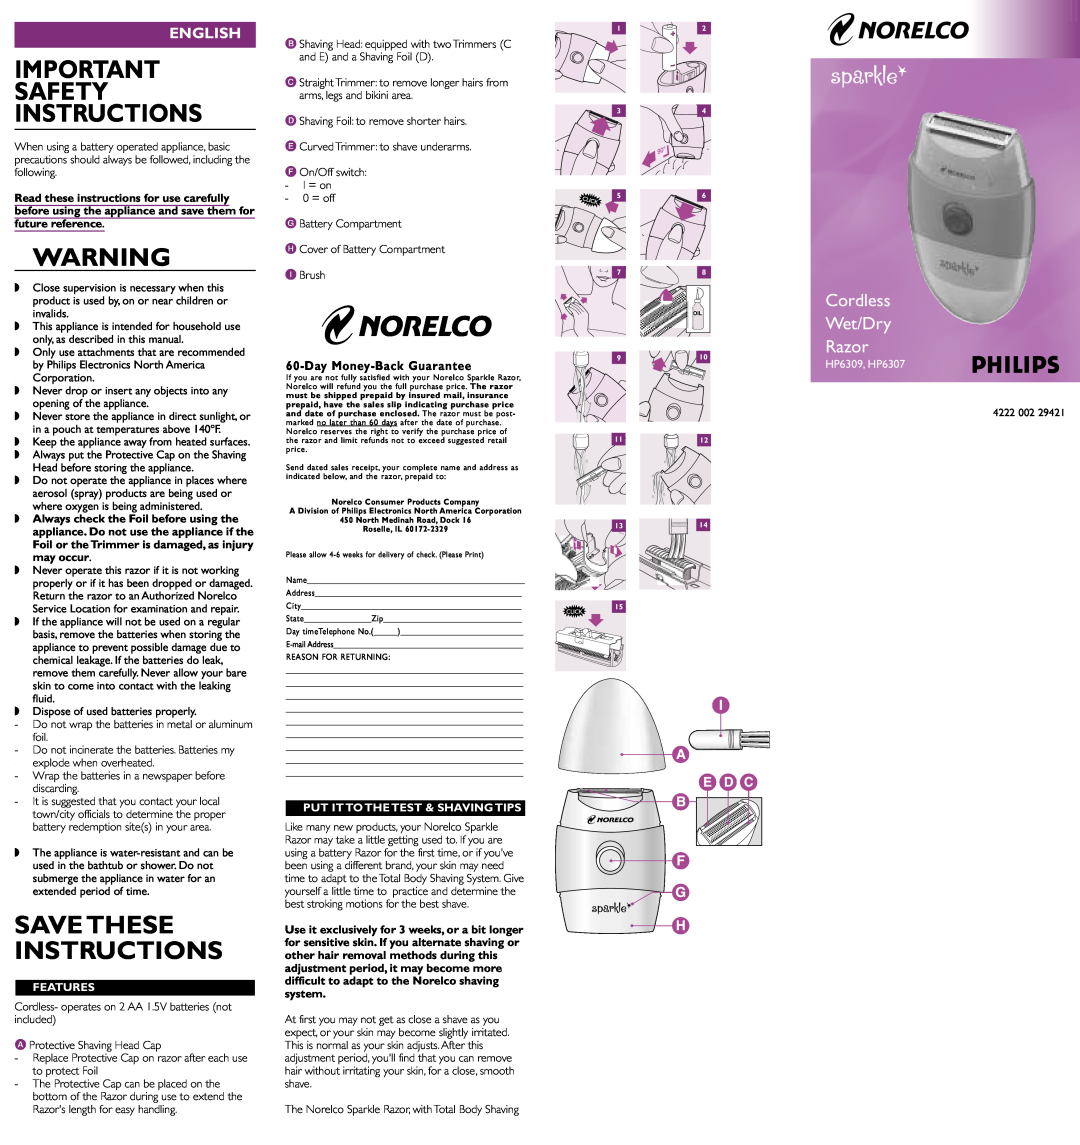 Philips HP6309 important safety instructions Features, Put It To The Test & Shaving Tips, Safety Instructions, English 